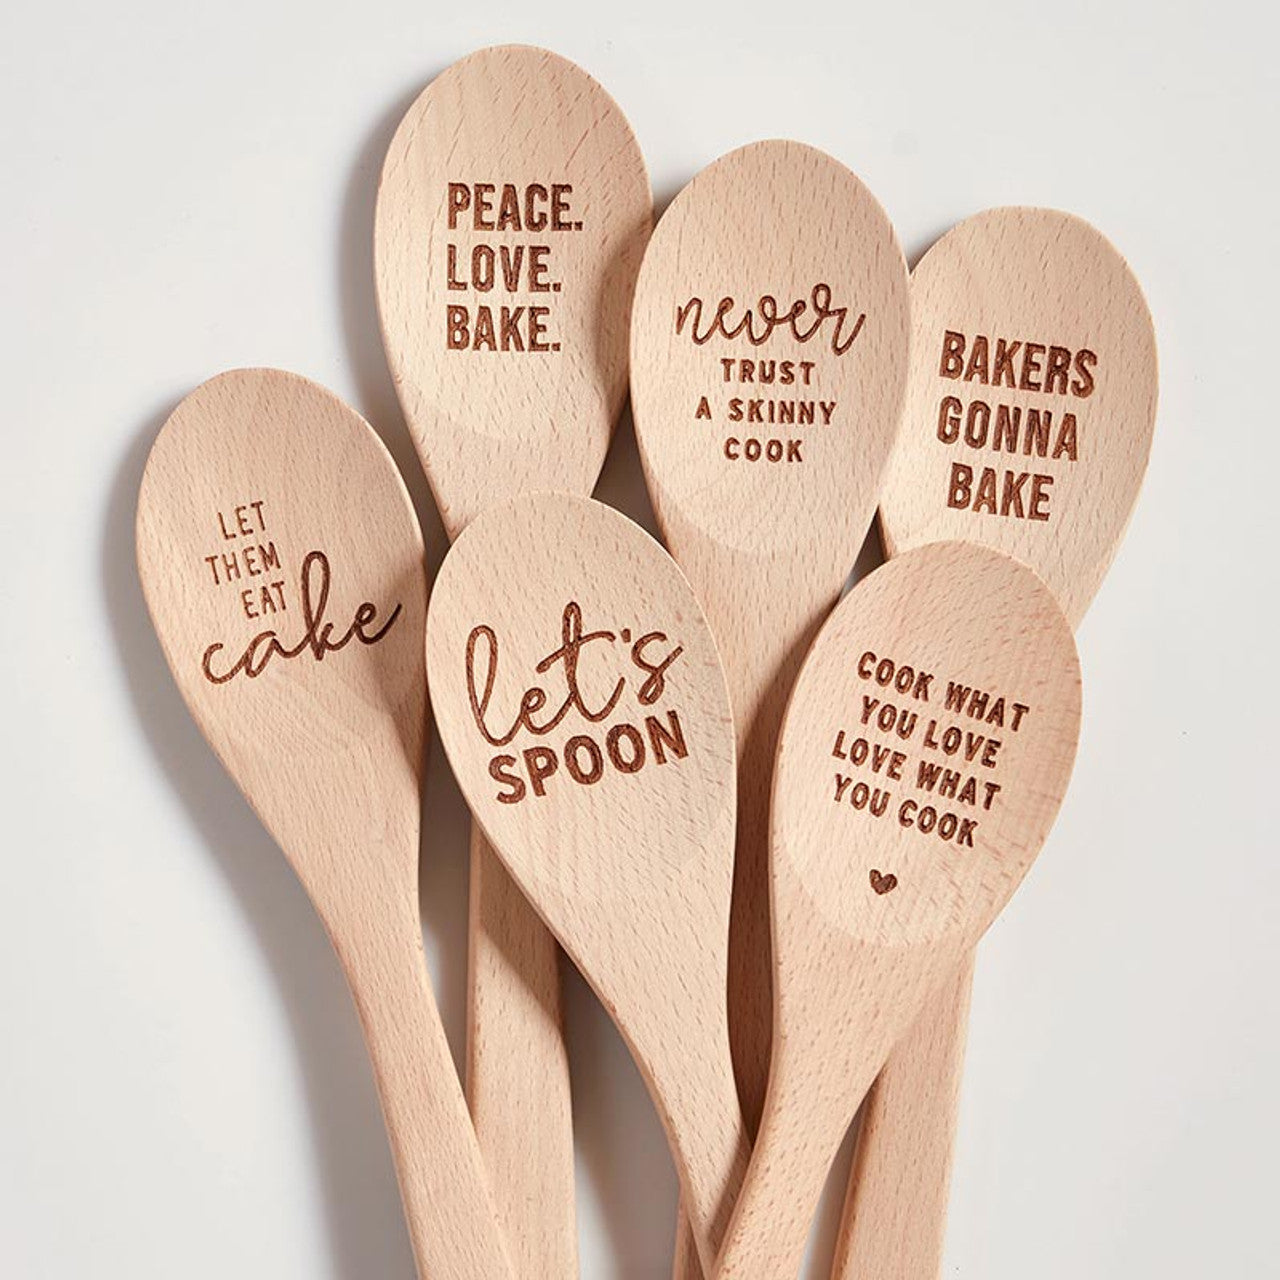 Let's Spoon Wooden Cooking Spoon | Beech Wood Kitchen Utensil in Canvas Gift Bag